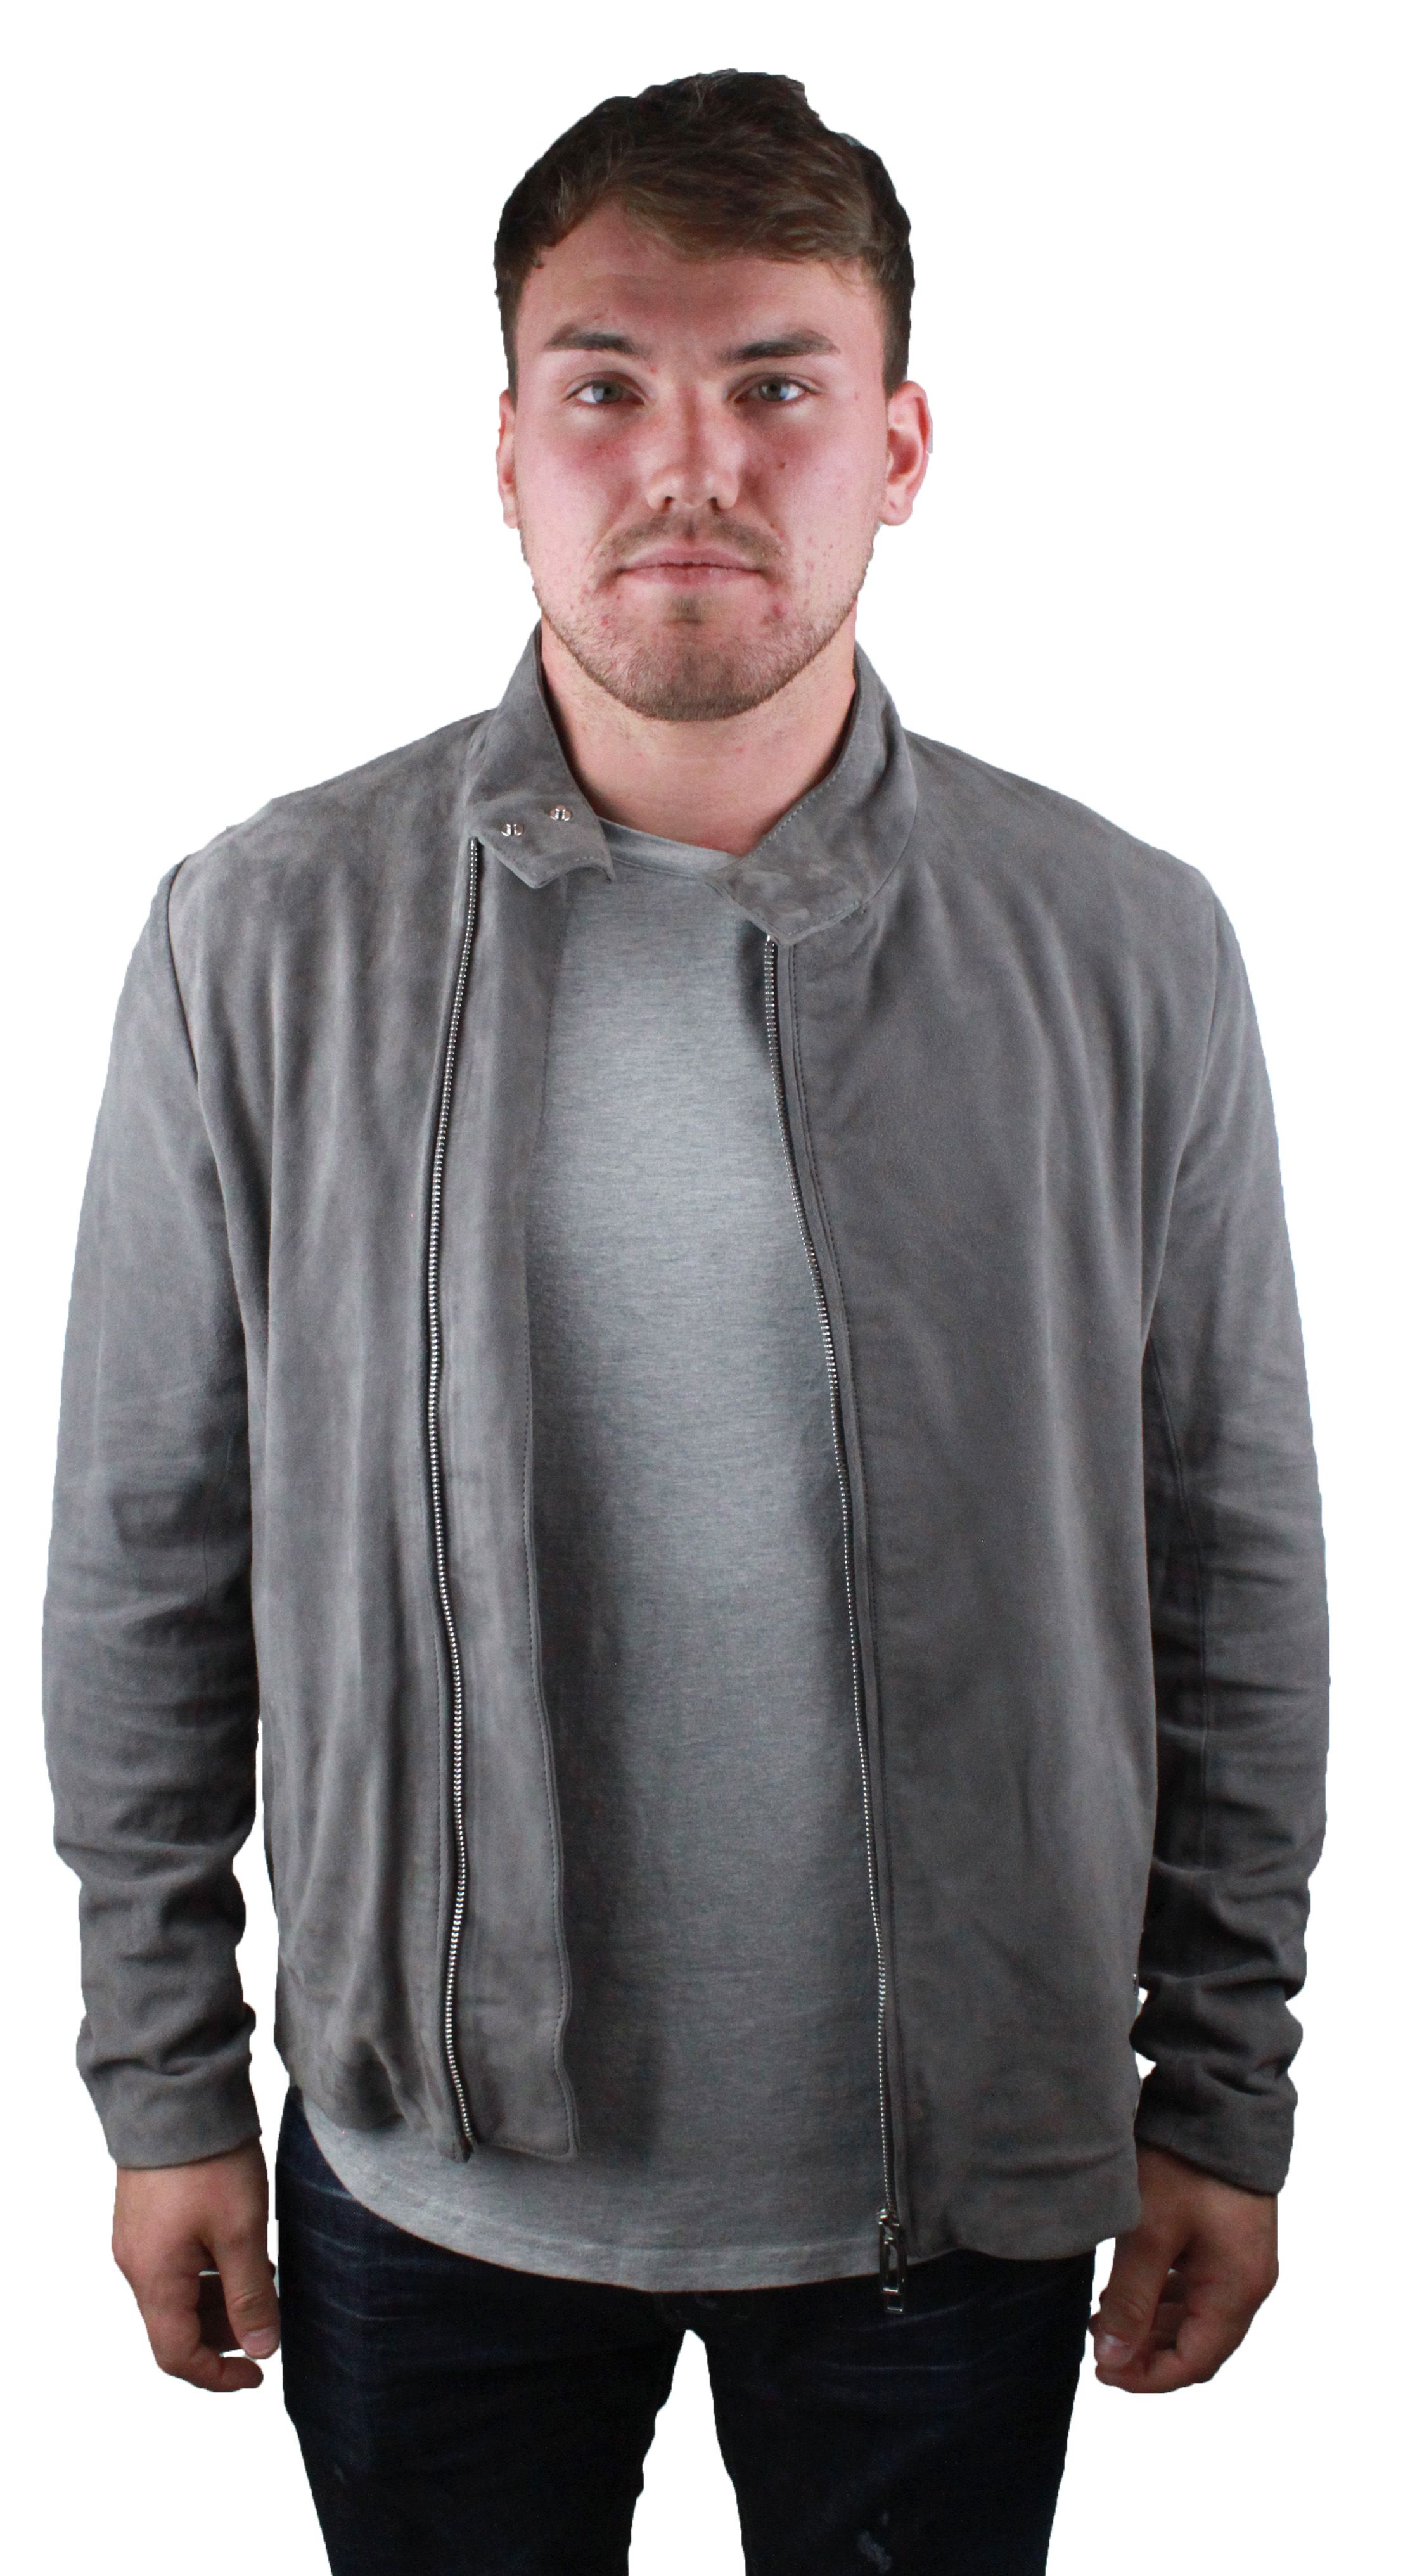 Emporio Armani 3Z1BM7 1LBBZ 0645 Leather Jacket. Grey Leather Jacket. 100% Goats Leather. Chinese Collar. Double Zip Central Closure. Branded Badge on Front